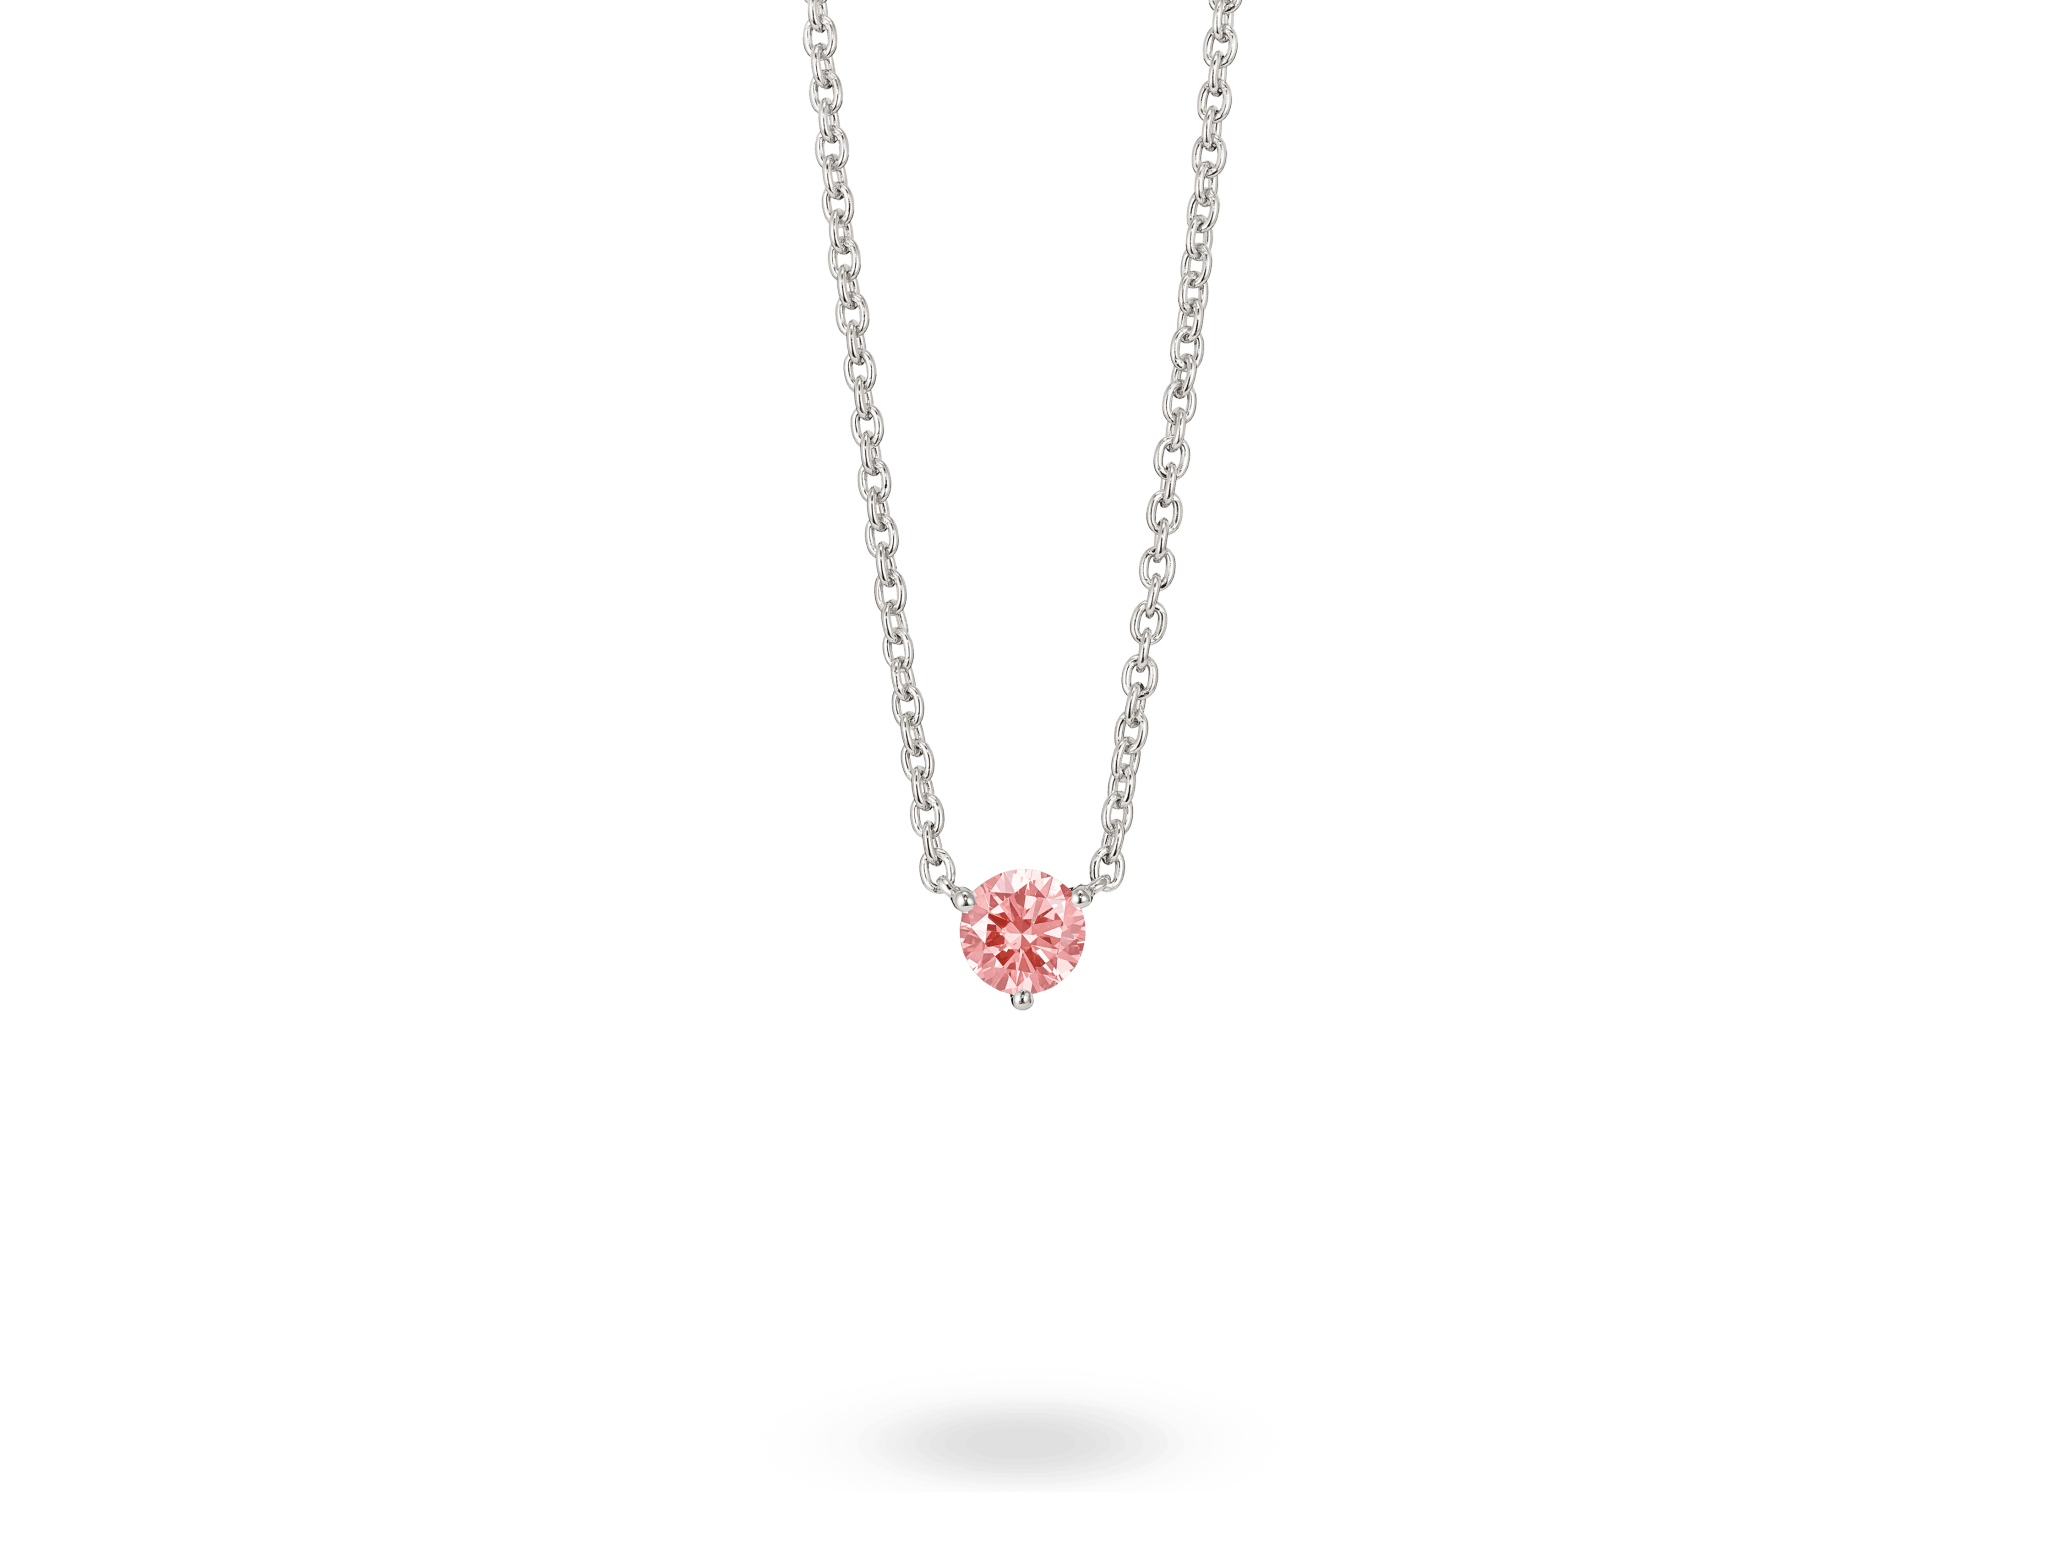 100%Authentic Return to Tiffany Heart Tag Necklace | Pink heart necklace,  Return to tiffany necklace, Tiffany heart